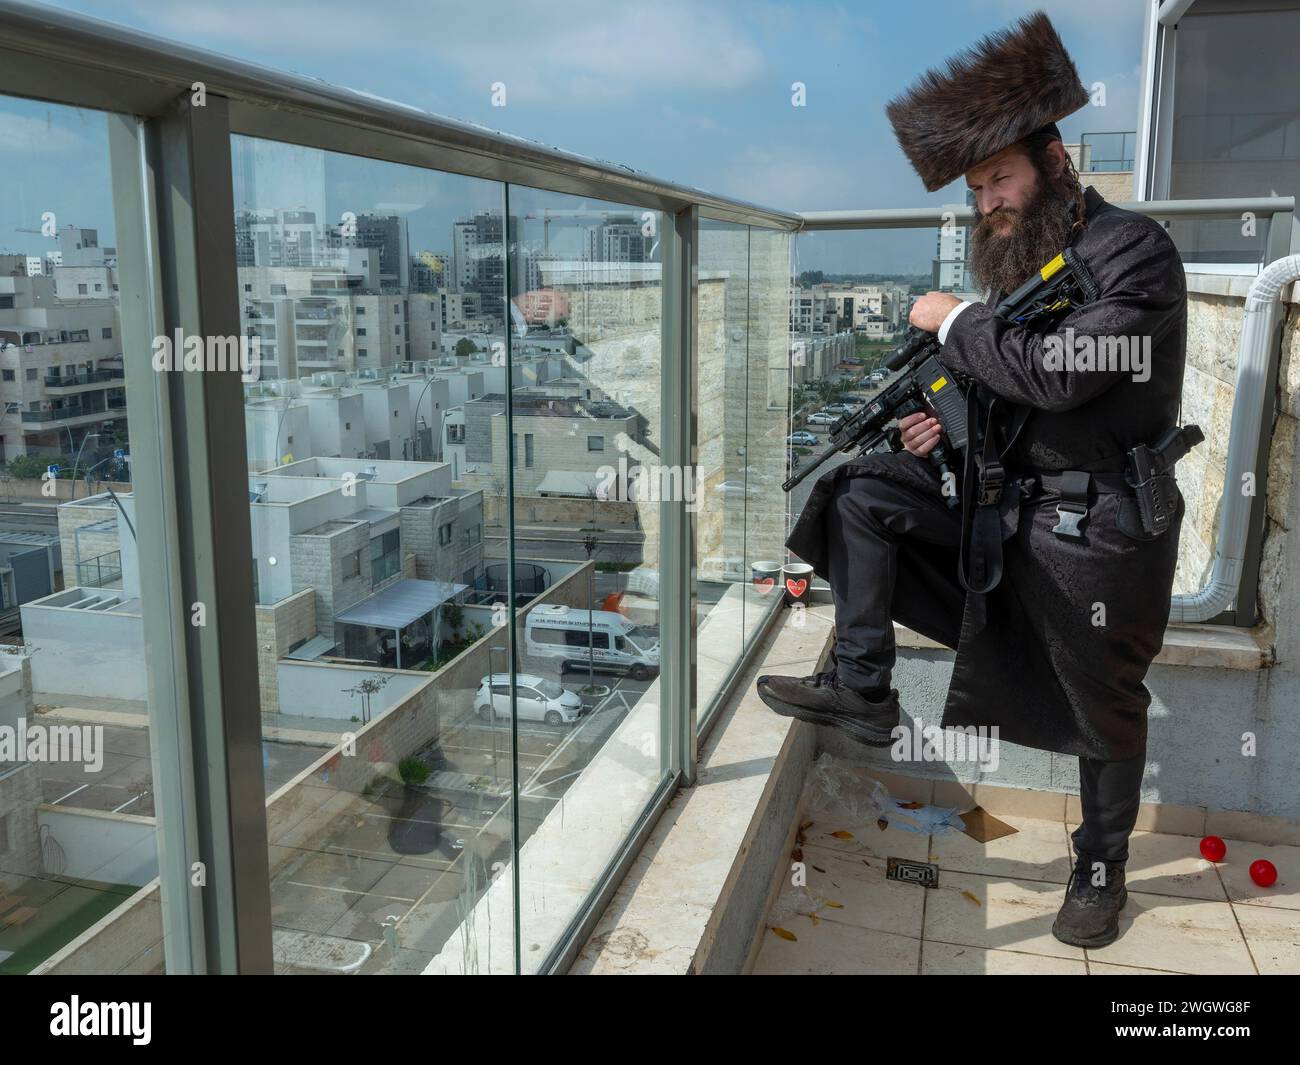 Assaf Peleg, today an Orthodox Jewish rabbi, overlooking the southern Israeli city of Kiryat Malachi on February 6, 2024. Peleg comes from a kibbutz member and became an officer in the IDF, a Captain who served in a an elite unit, fighting throughout the second intifada. Today, Peleg, in his early 40s, is a religious Hasid and the father of seven who shares his vast military knowledge with various civil security tasks he undertakes, such as the emergency response team he helped to establish and train in the city of Kiryat Malachi. Since the October 7 Hamas atrocities and war, he has been armed Stock Photo